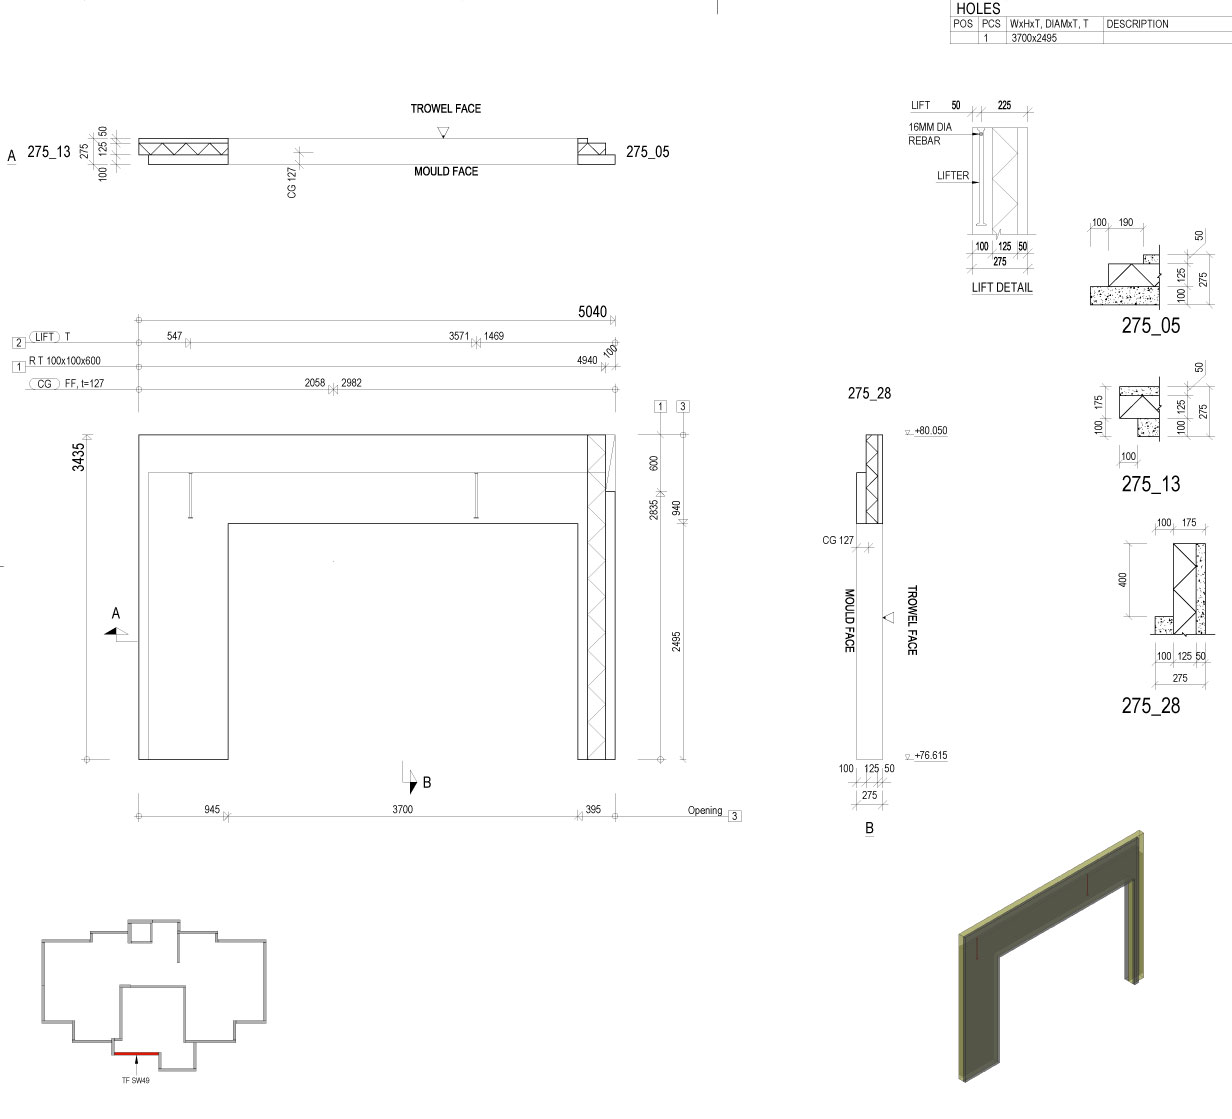 Hi Therm project shop drawing 4